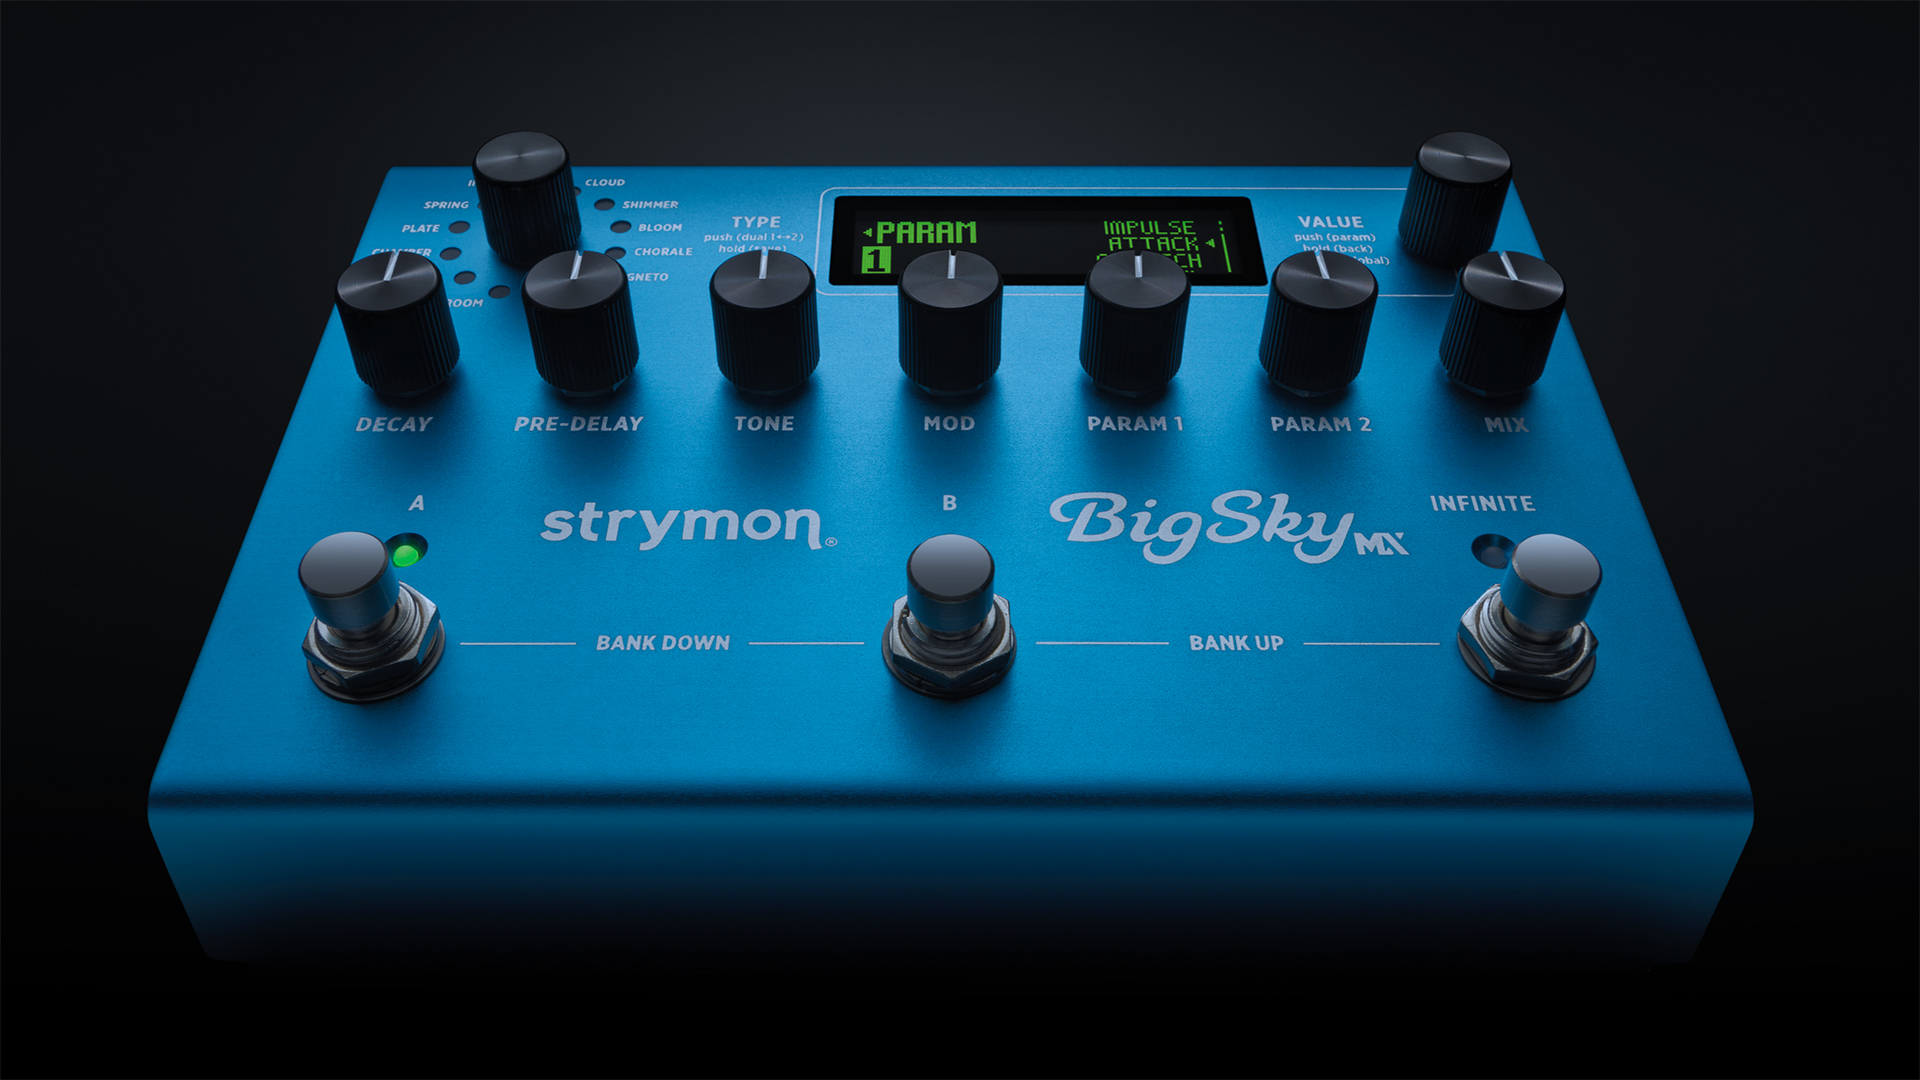 “Bigger, wider and cleaner than anything we’ve been able to achieve in the past”: Strymon’s BigSky MX promises to usher in the next generation of reverb pedal